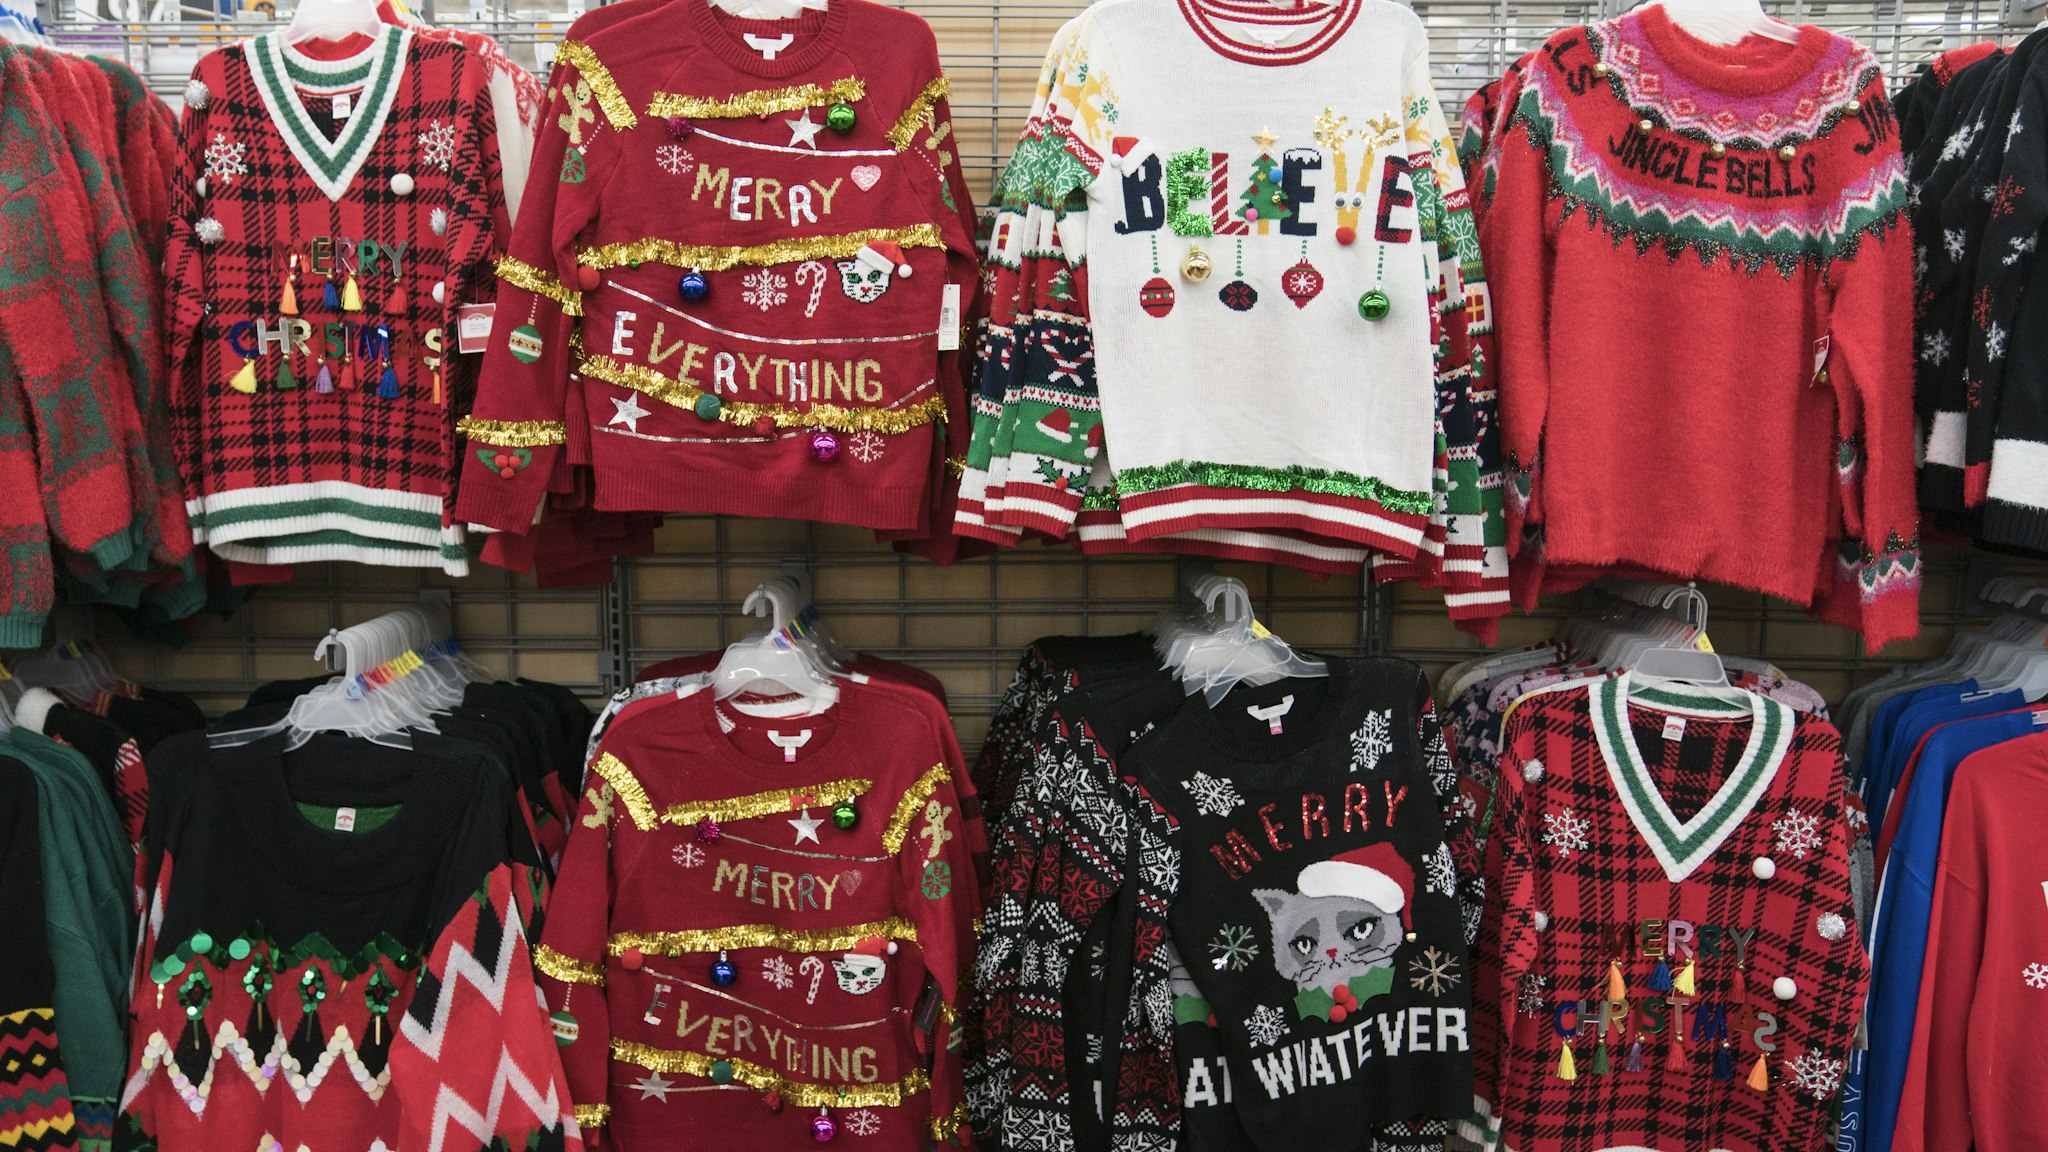 KING OF PRUSSIA, PA - NOVEMBER 28: Christmas sweaters are seen in Walmart on Thanksgiving night ahead of Black Friday on November 28, 2019 in King of Prussia, United States. (Photo by Sarah Silbiger/Getty Images)